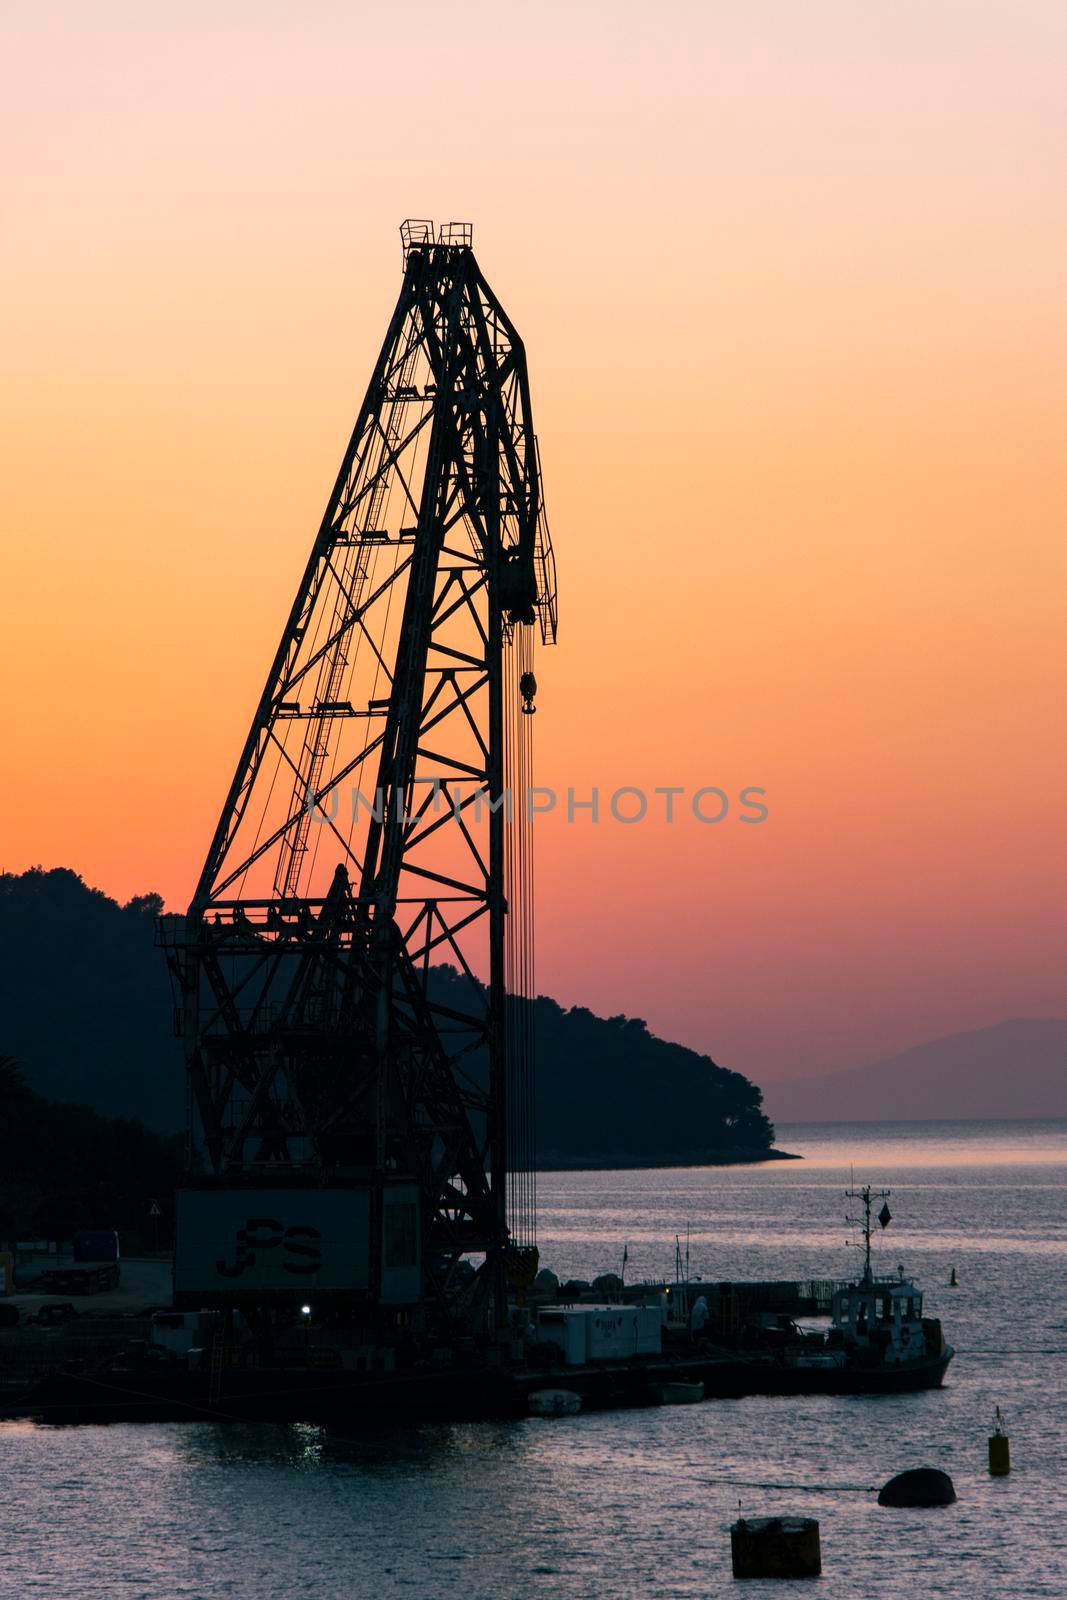 Silhouette of giant crane on Croatian Island at sunset with orange sky by StefanMal